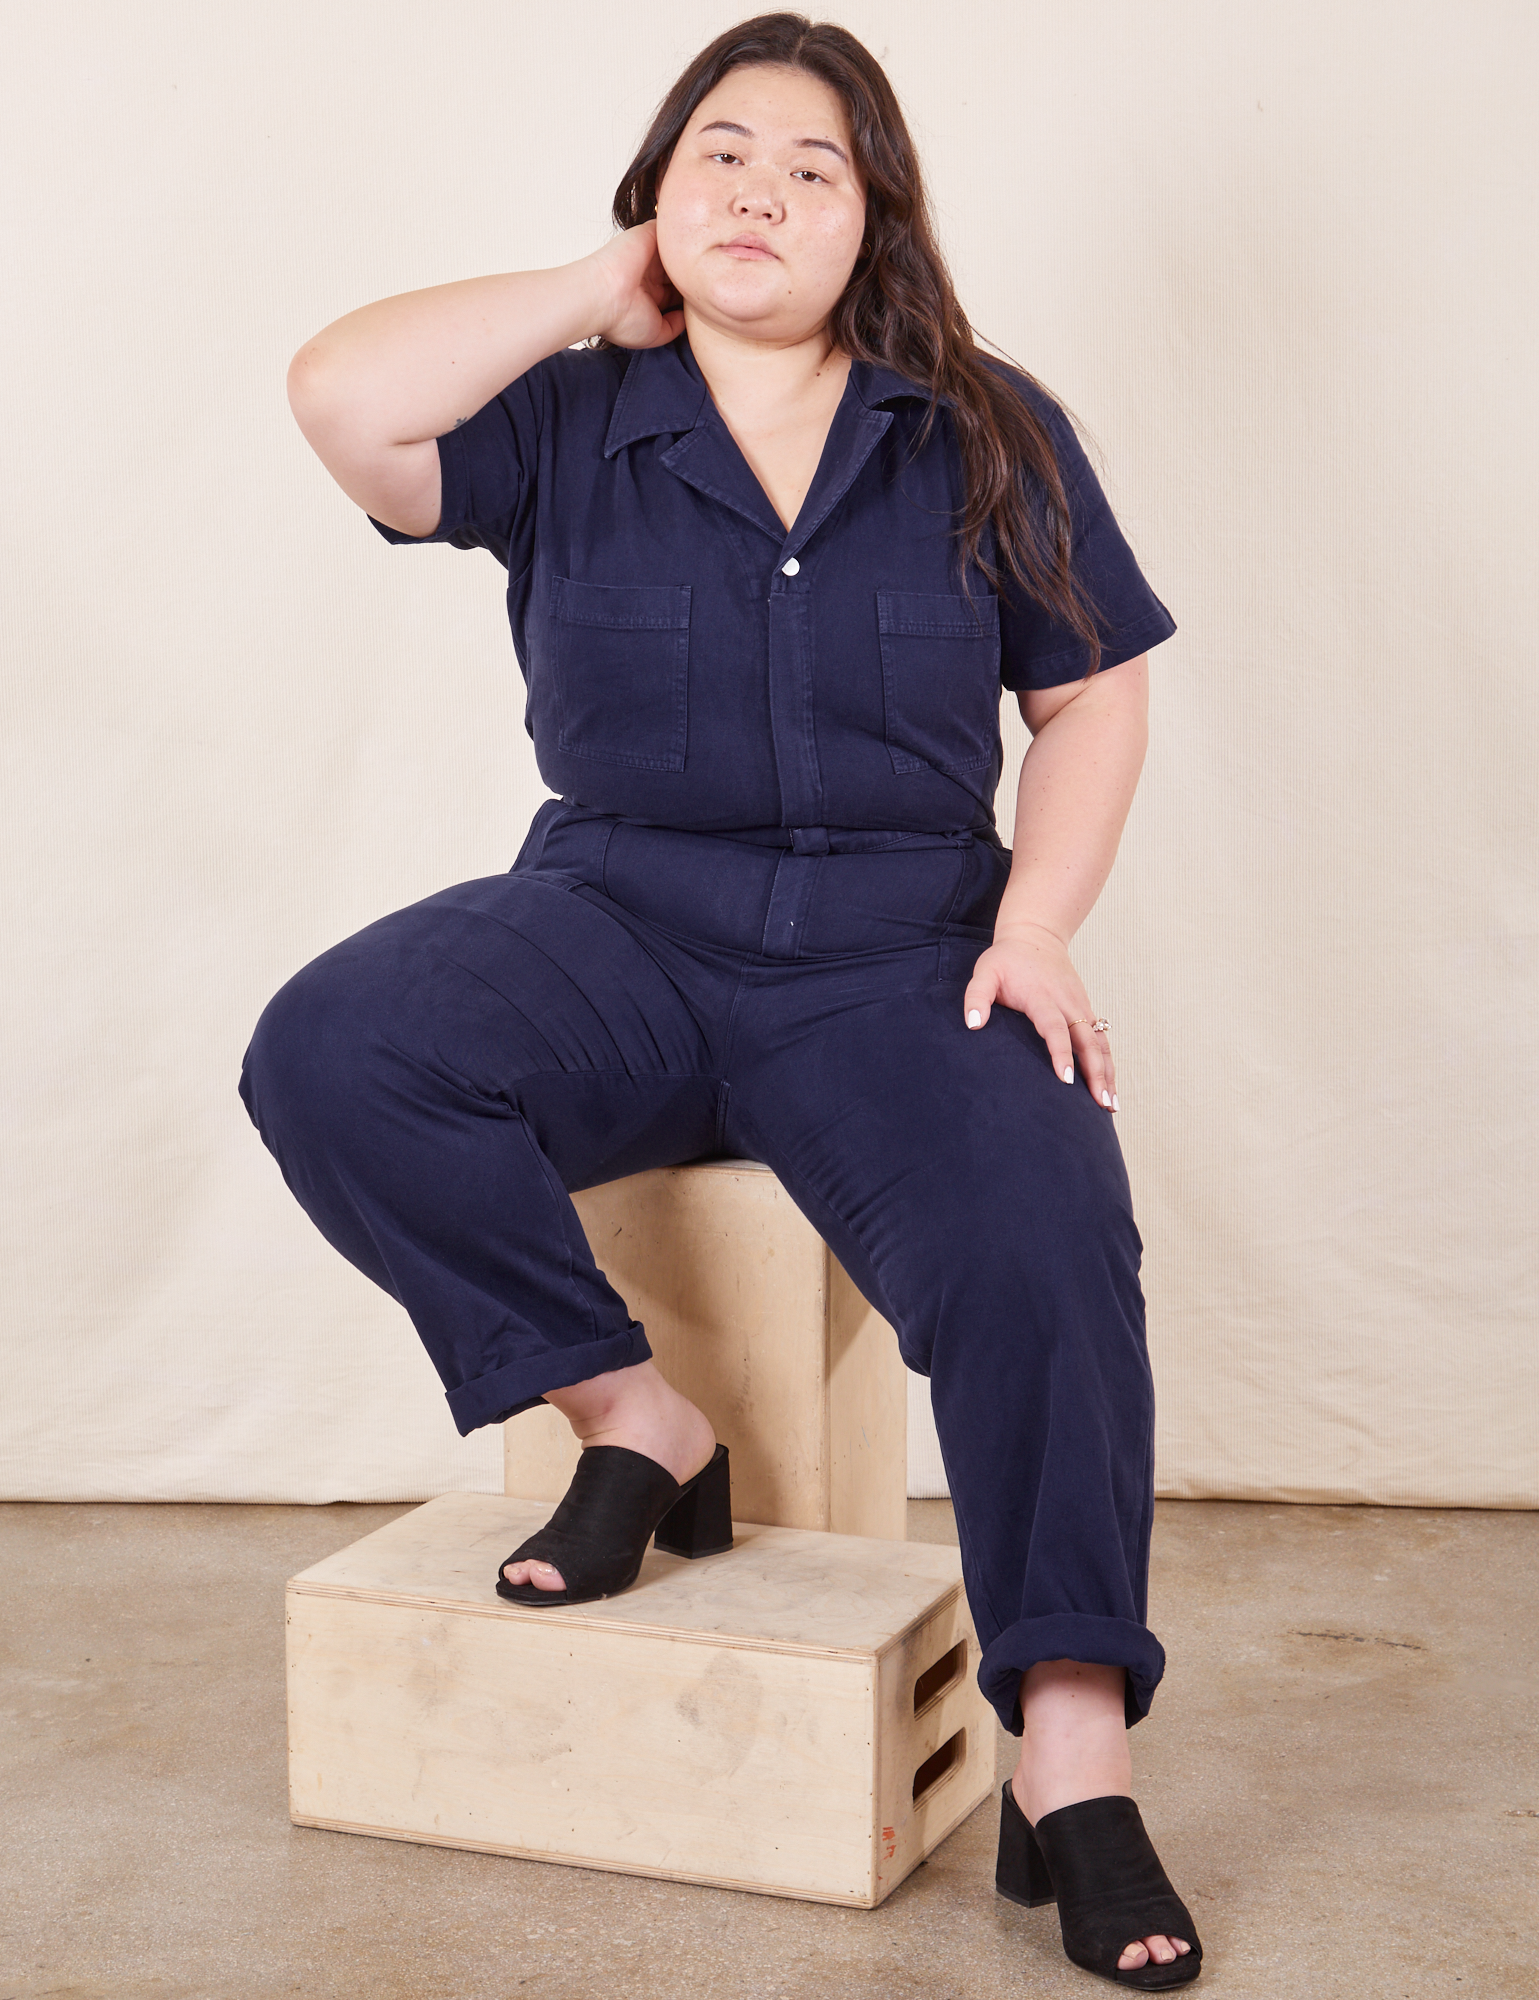 Short Sleeve Jumpsuit in Navy Blue on Ashley sitting on wooden crates